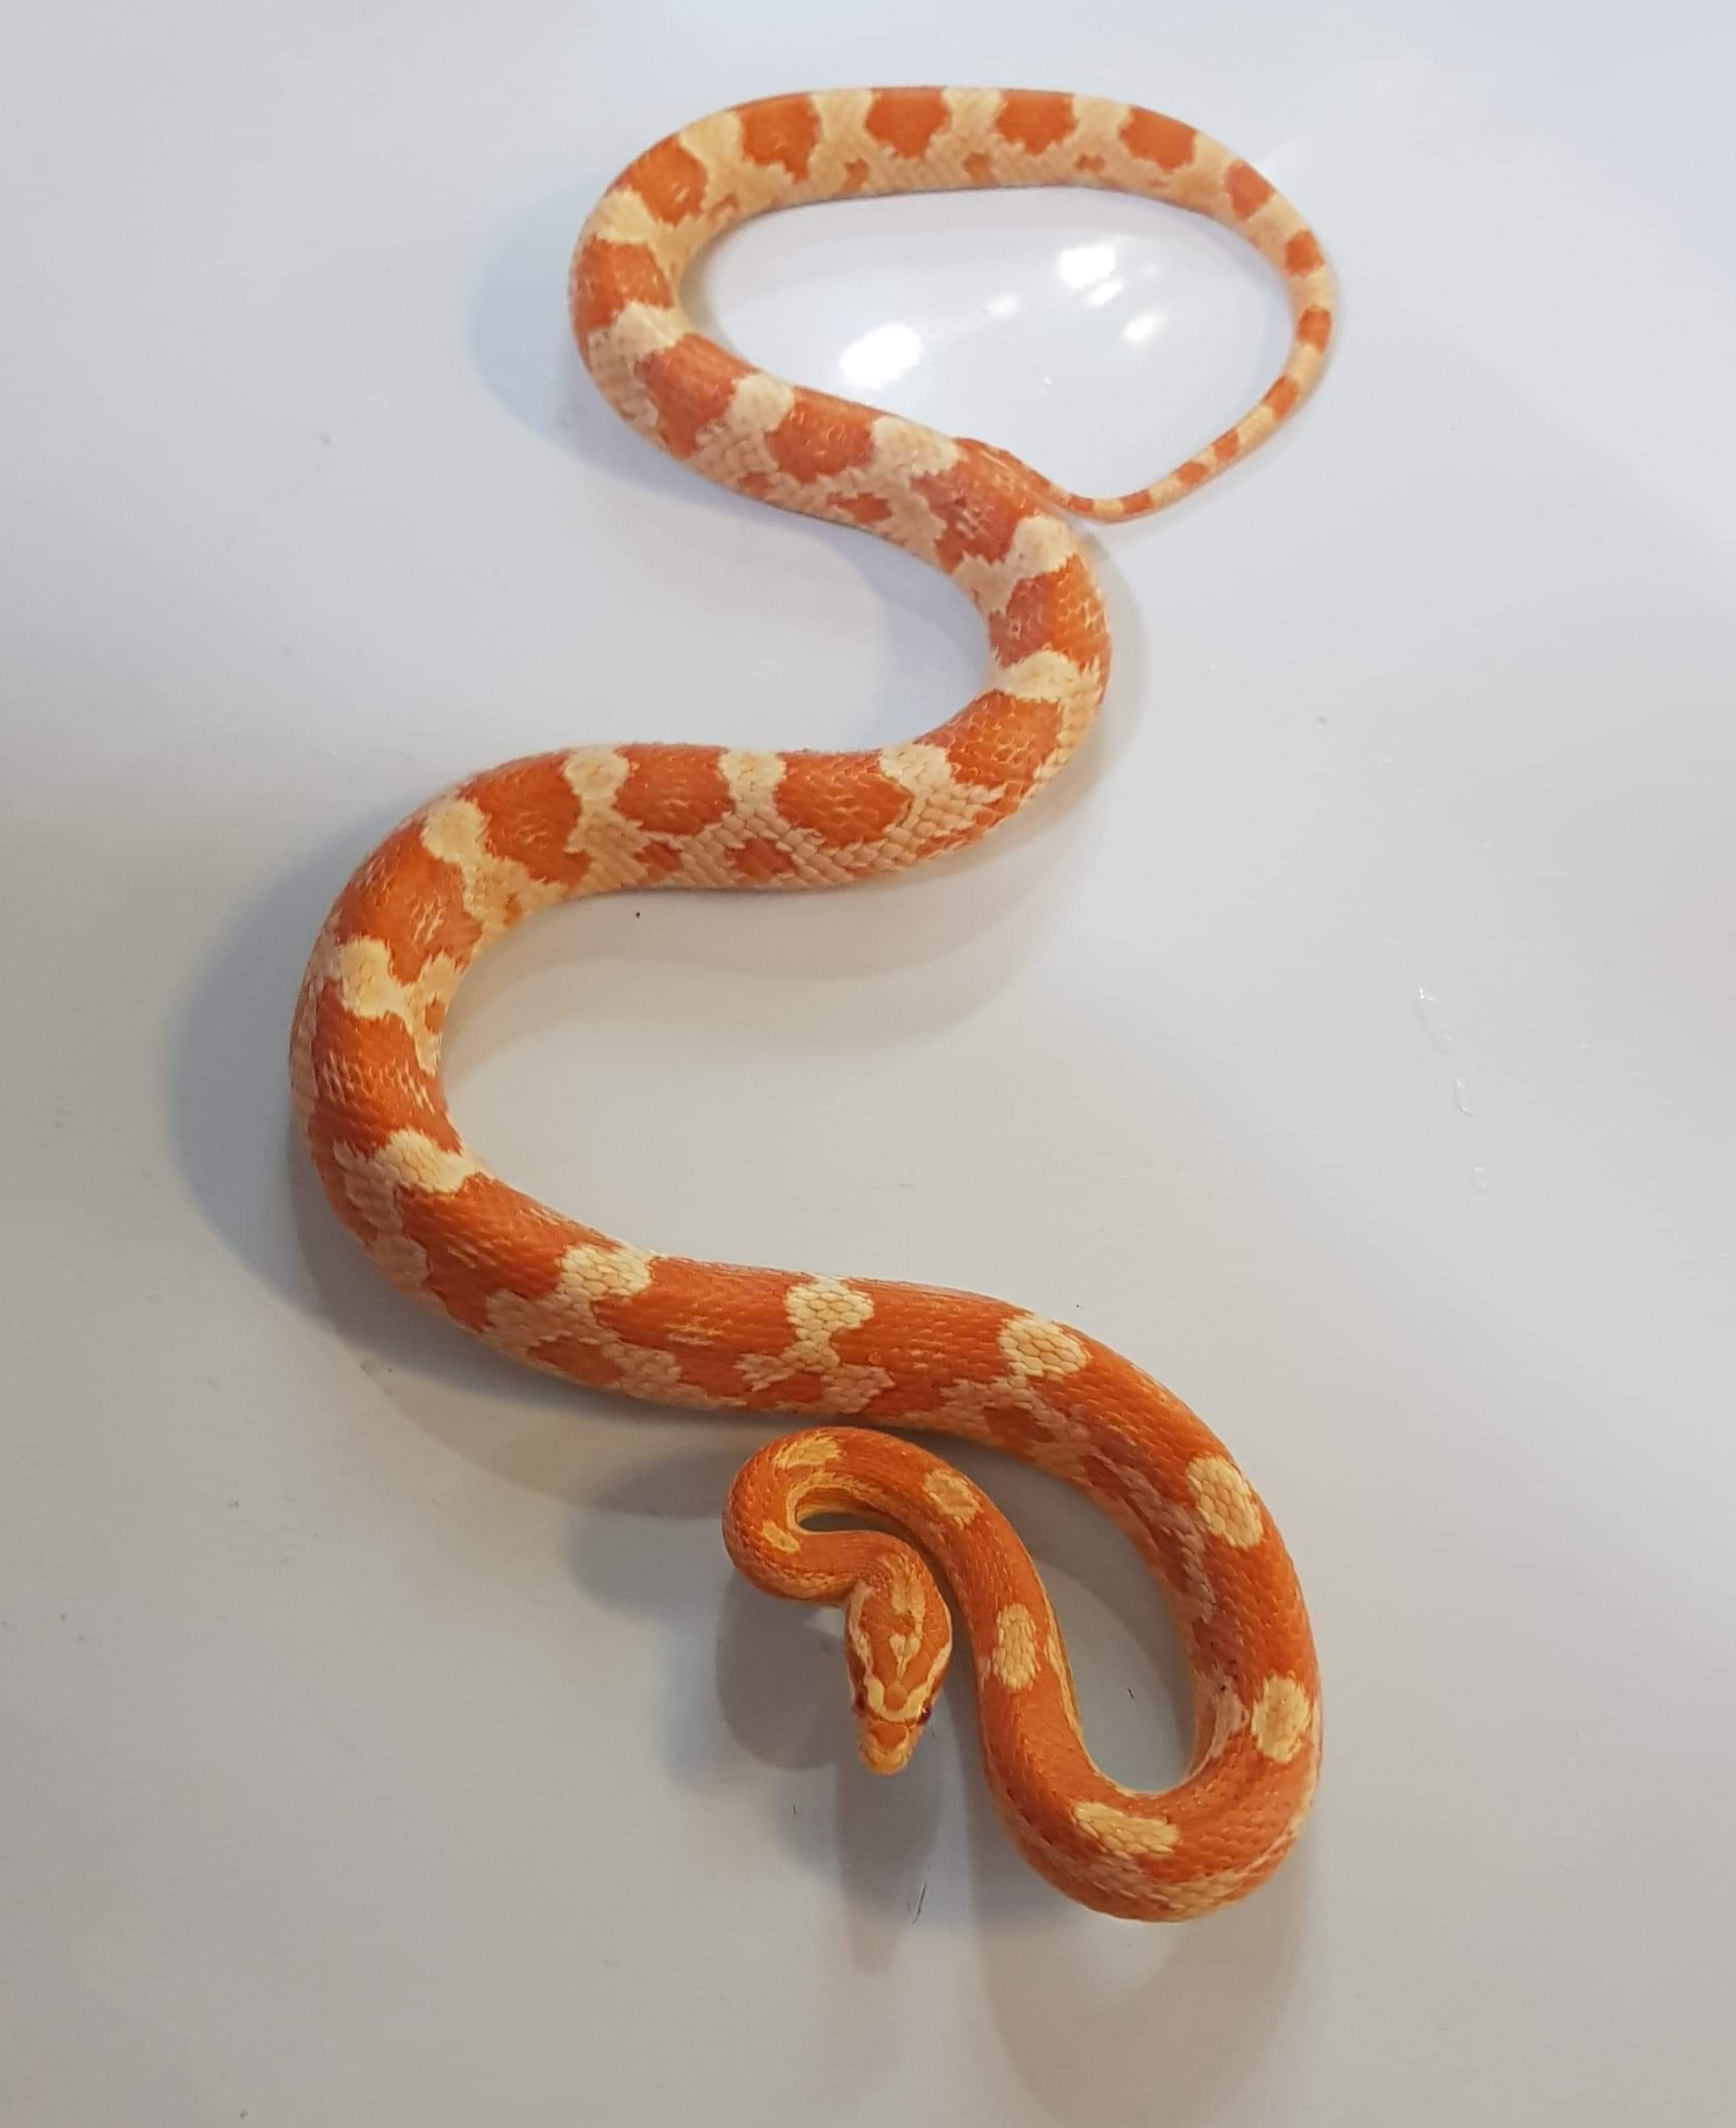 The RSPCA were called out to a home in Leeds after a corn snake was discovered